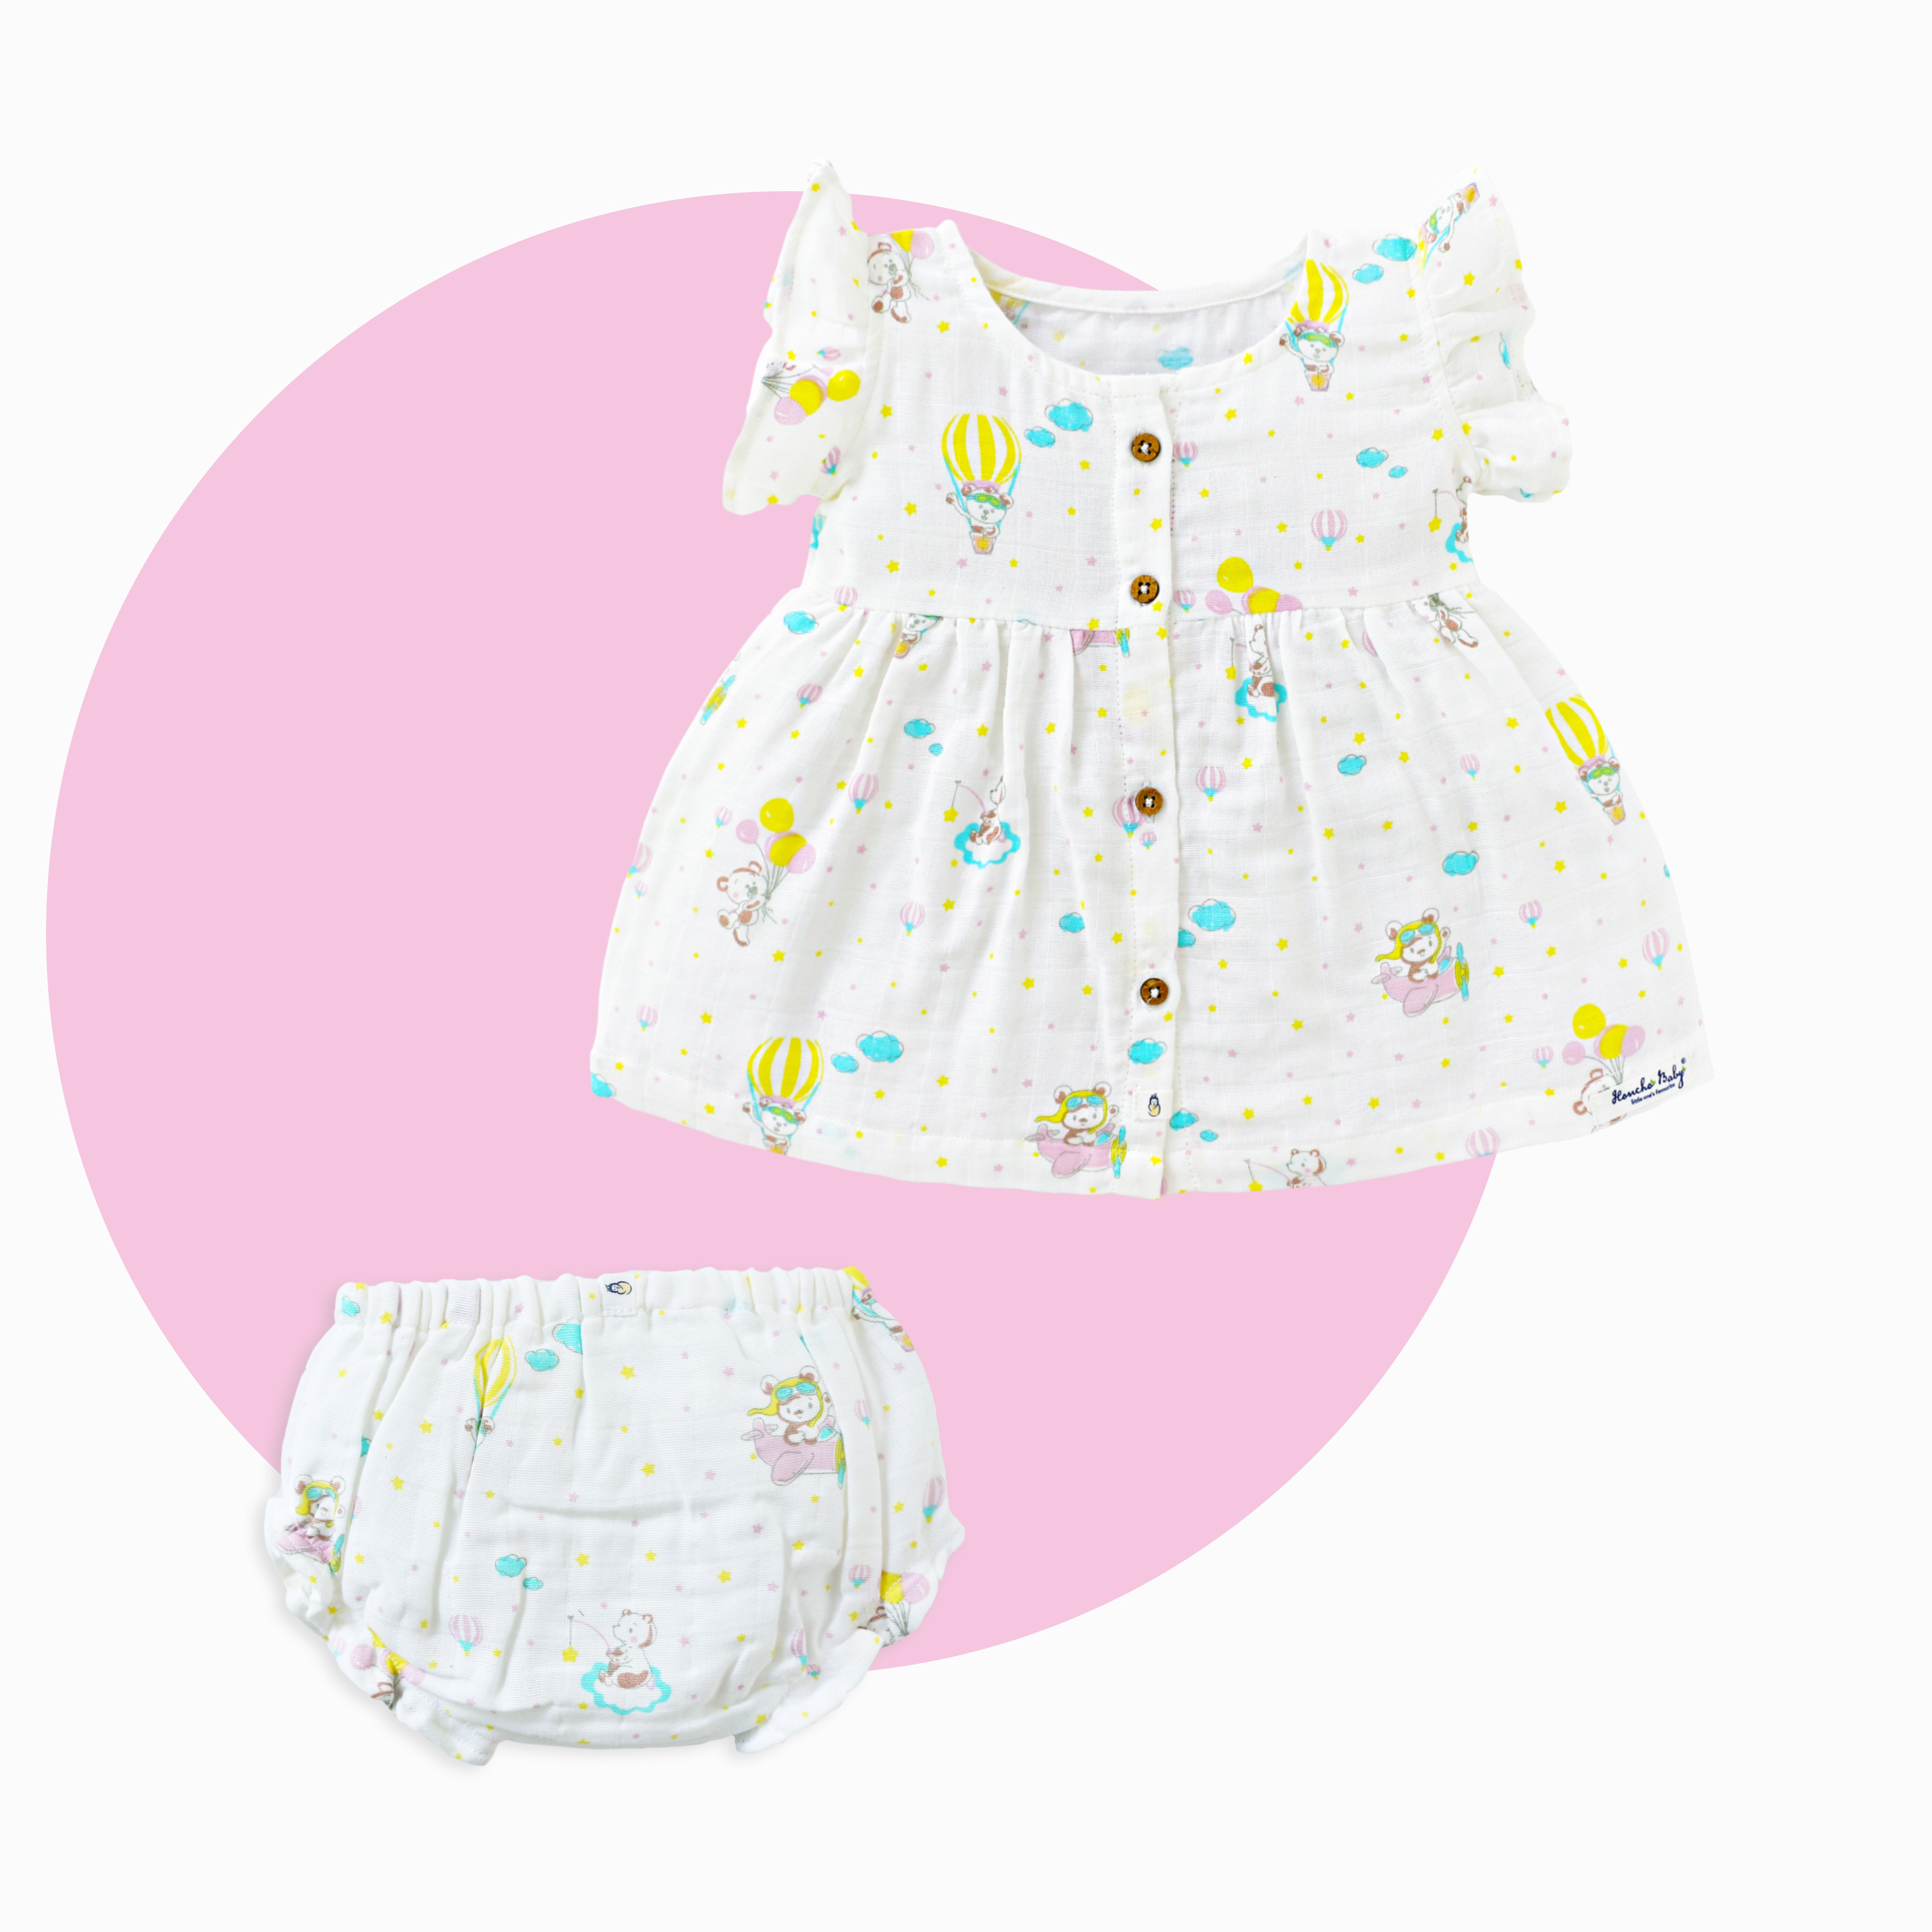 Cotton Frock and Bloomers (1 - 2 years) - 1 pack